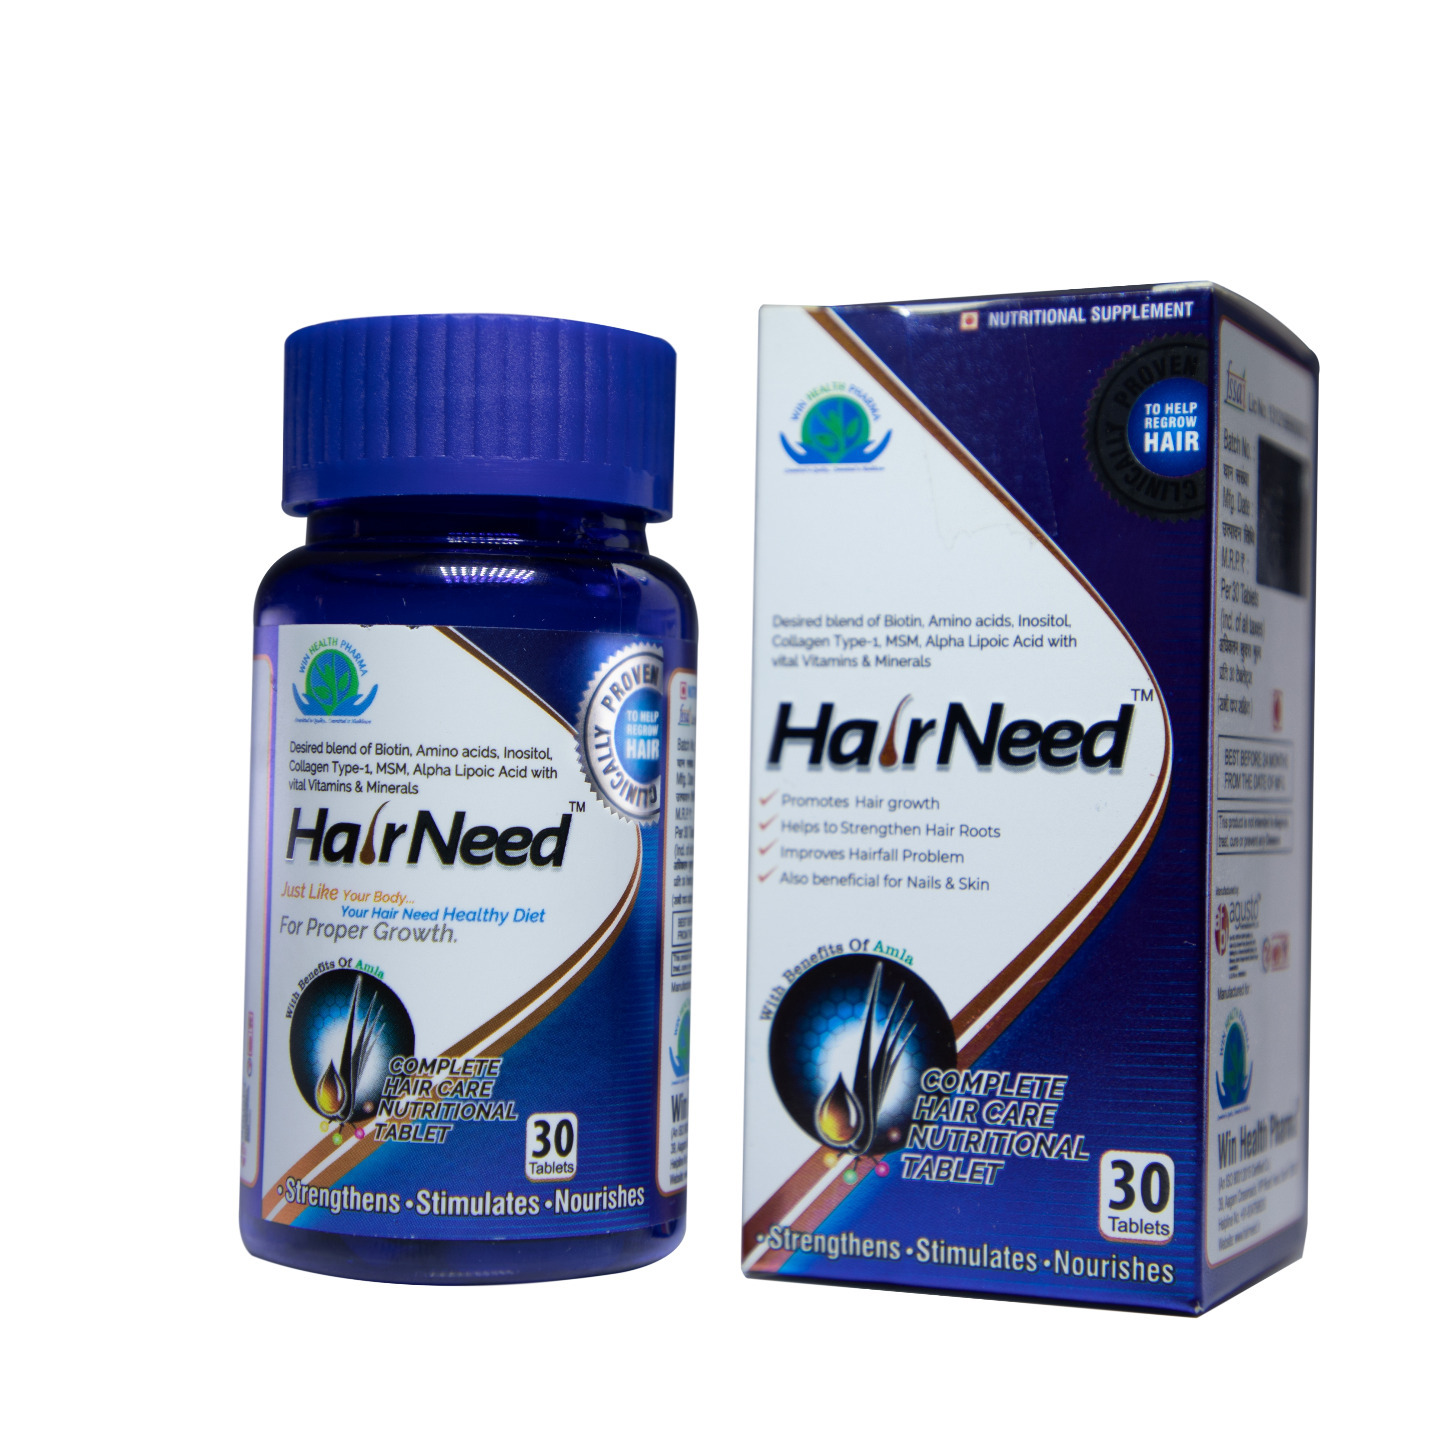 HairNeed Hair Supplement Tablets